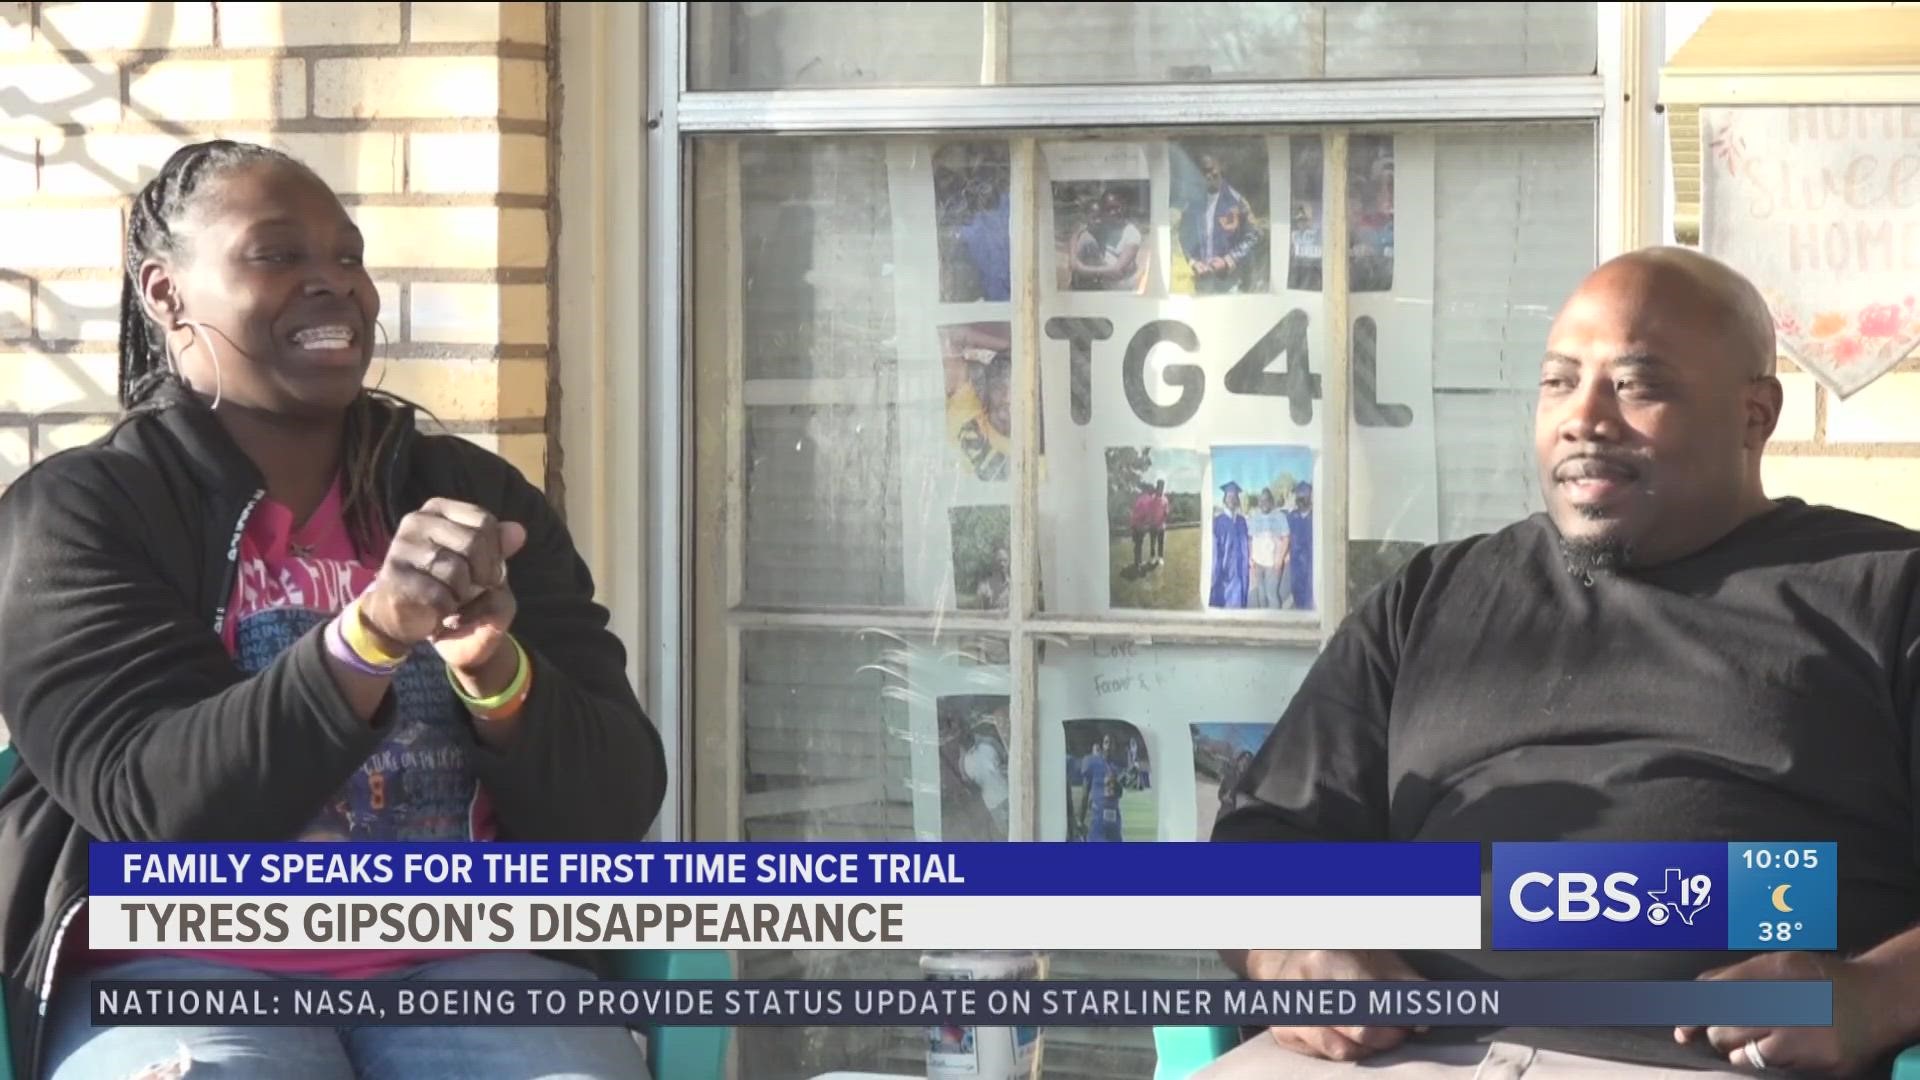 EXCLUSIVE: Tyress Gipson's family speaks for the first time since the trial